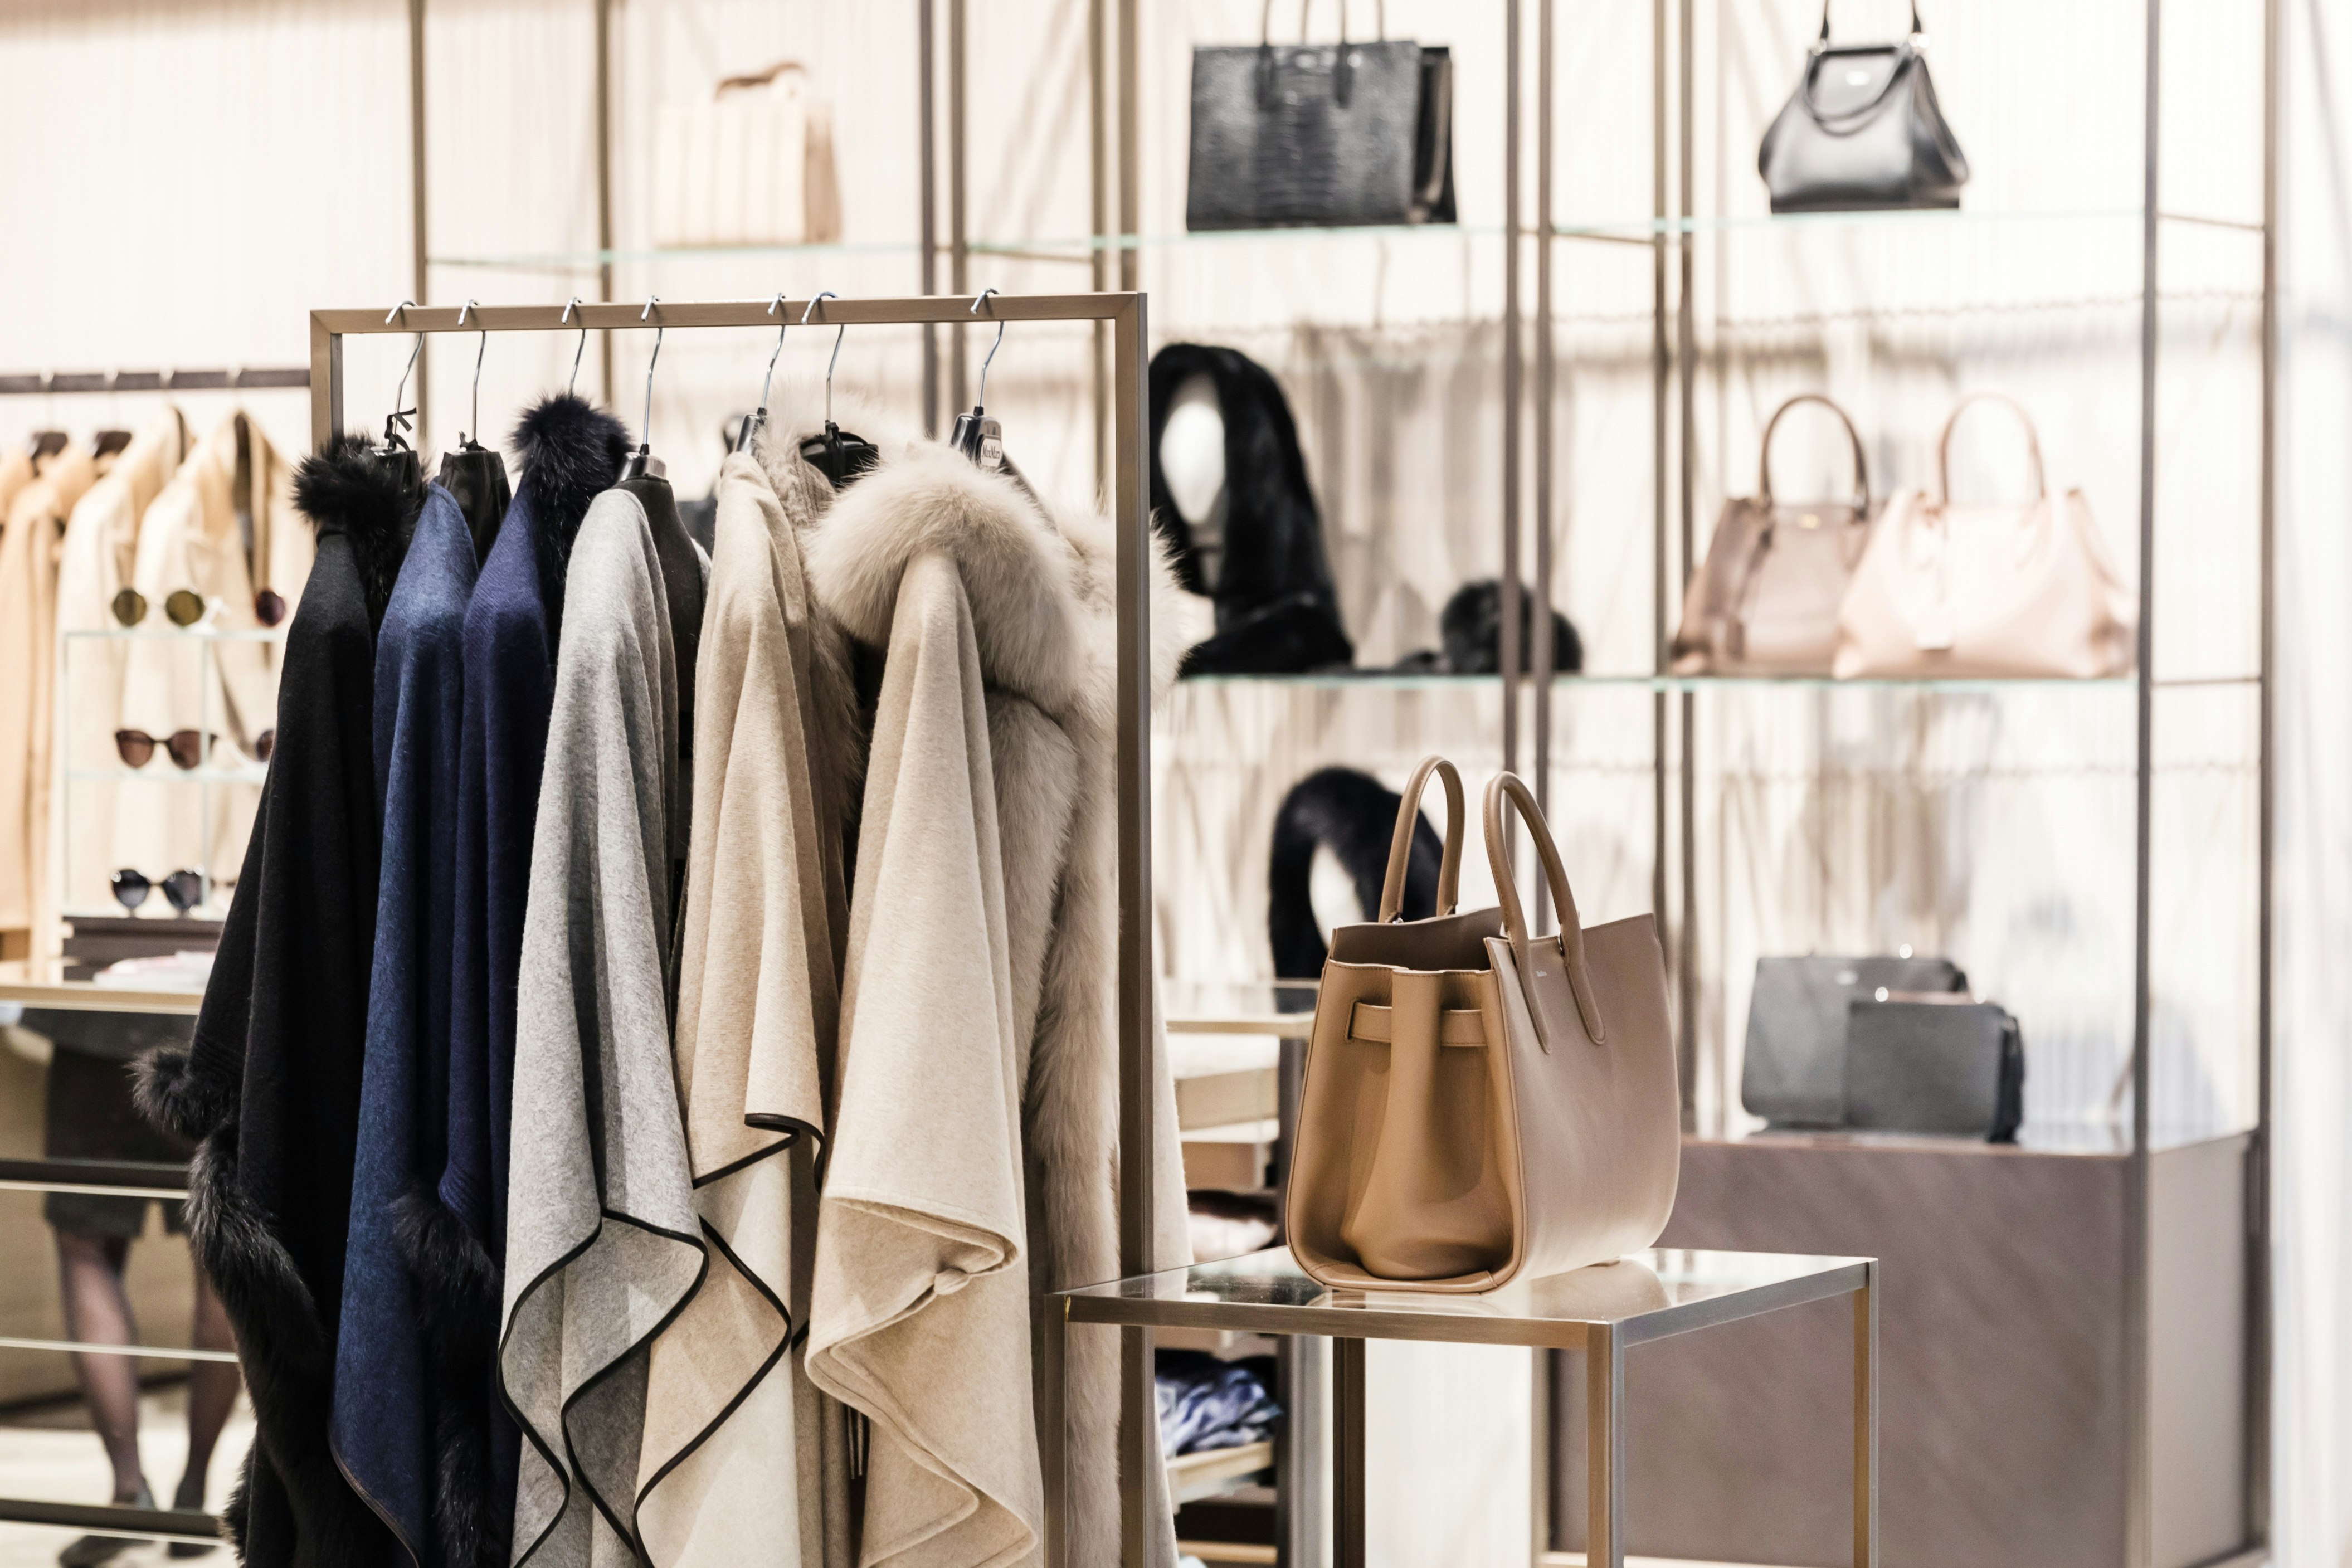 The 8 Best Luxury Fashion Websites to Shop for Designer Clothes